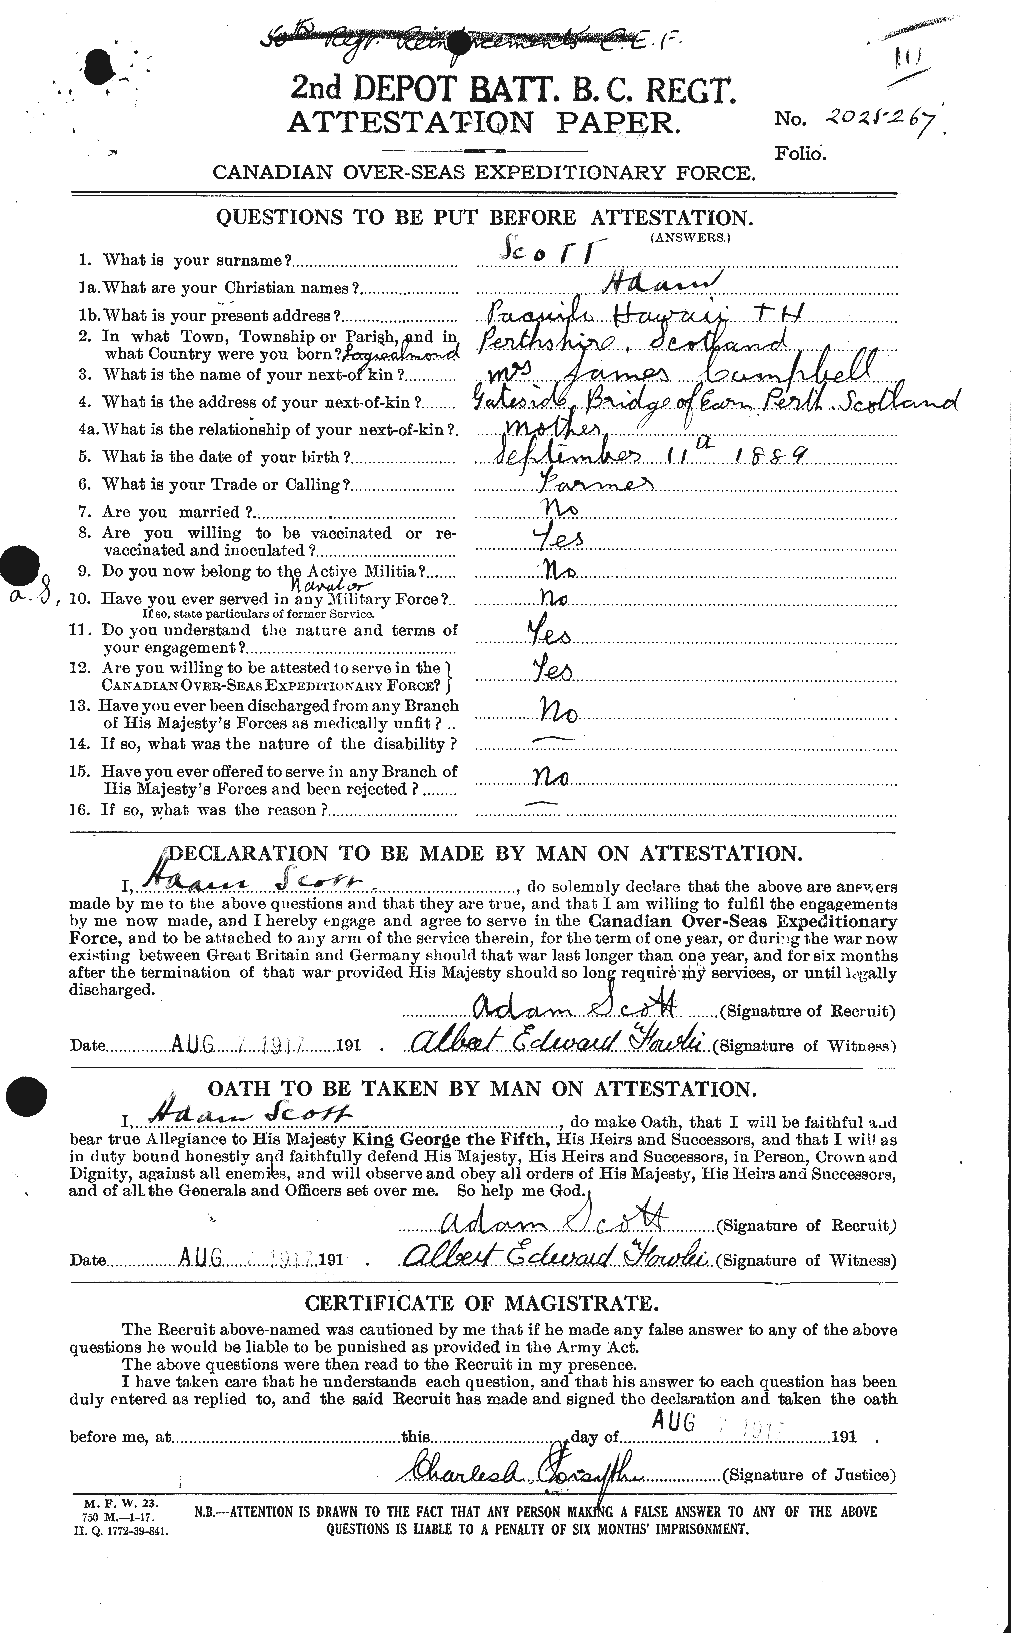 Personnel Records of the First World War - CEF 079286a